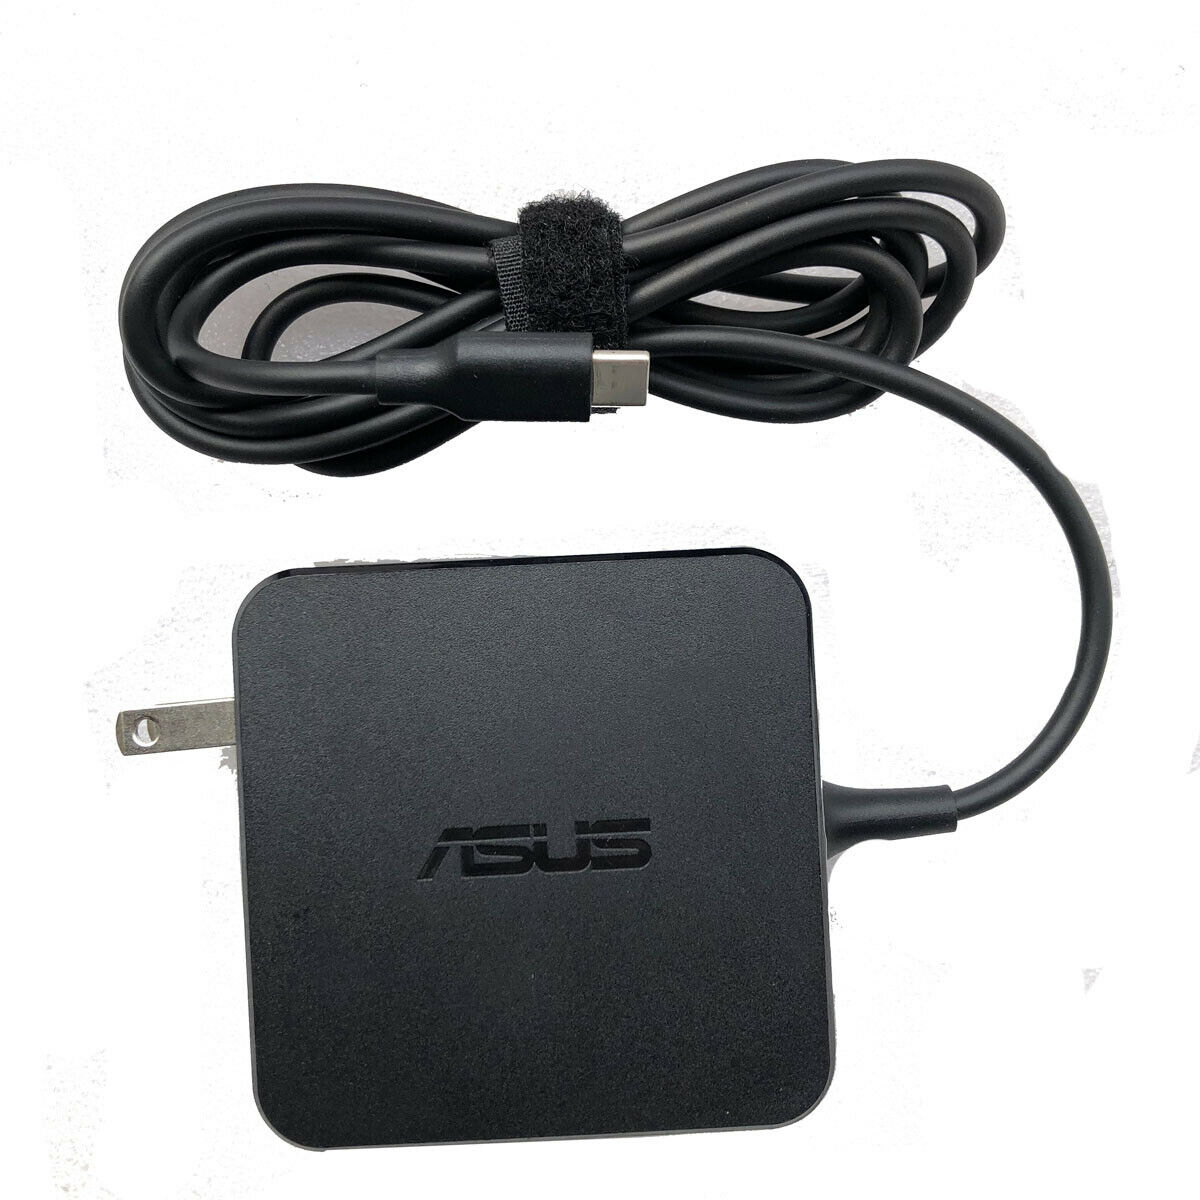 20V 65W USB Type-C ASUS AC Adapter Charger Asus ZenBook 3 ADL-65A1 Power Supply Country/Region of Manufacture: China C